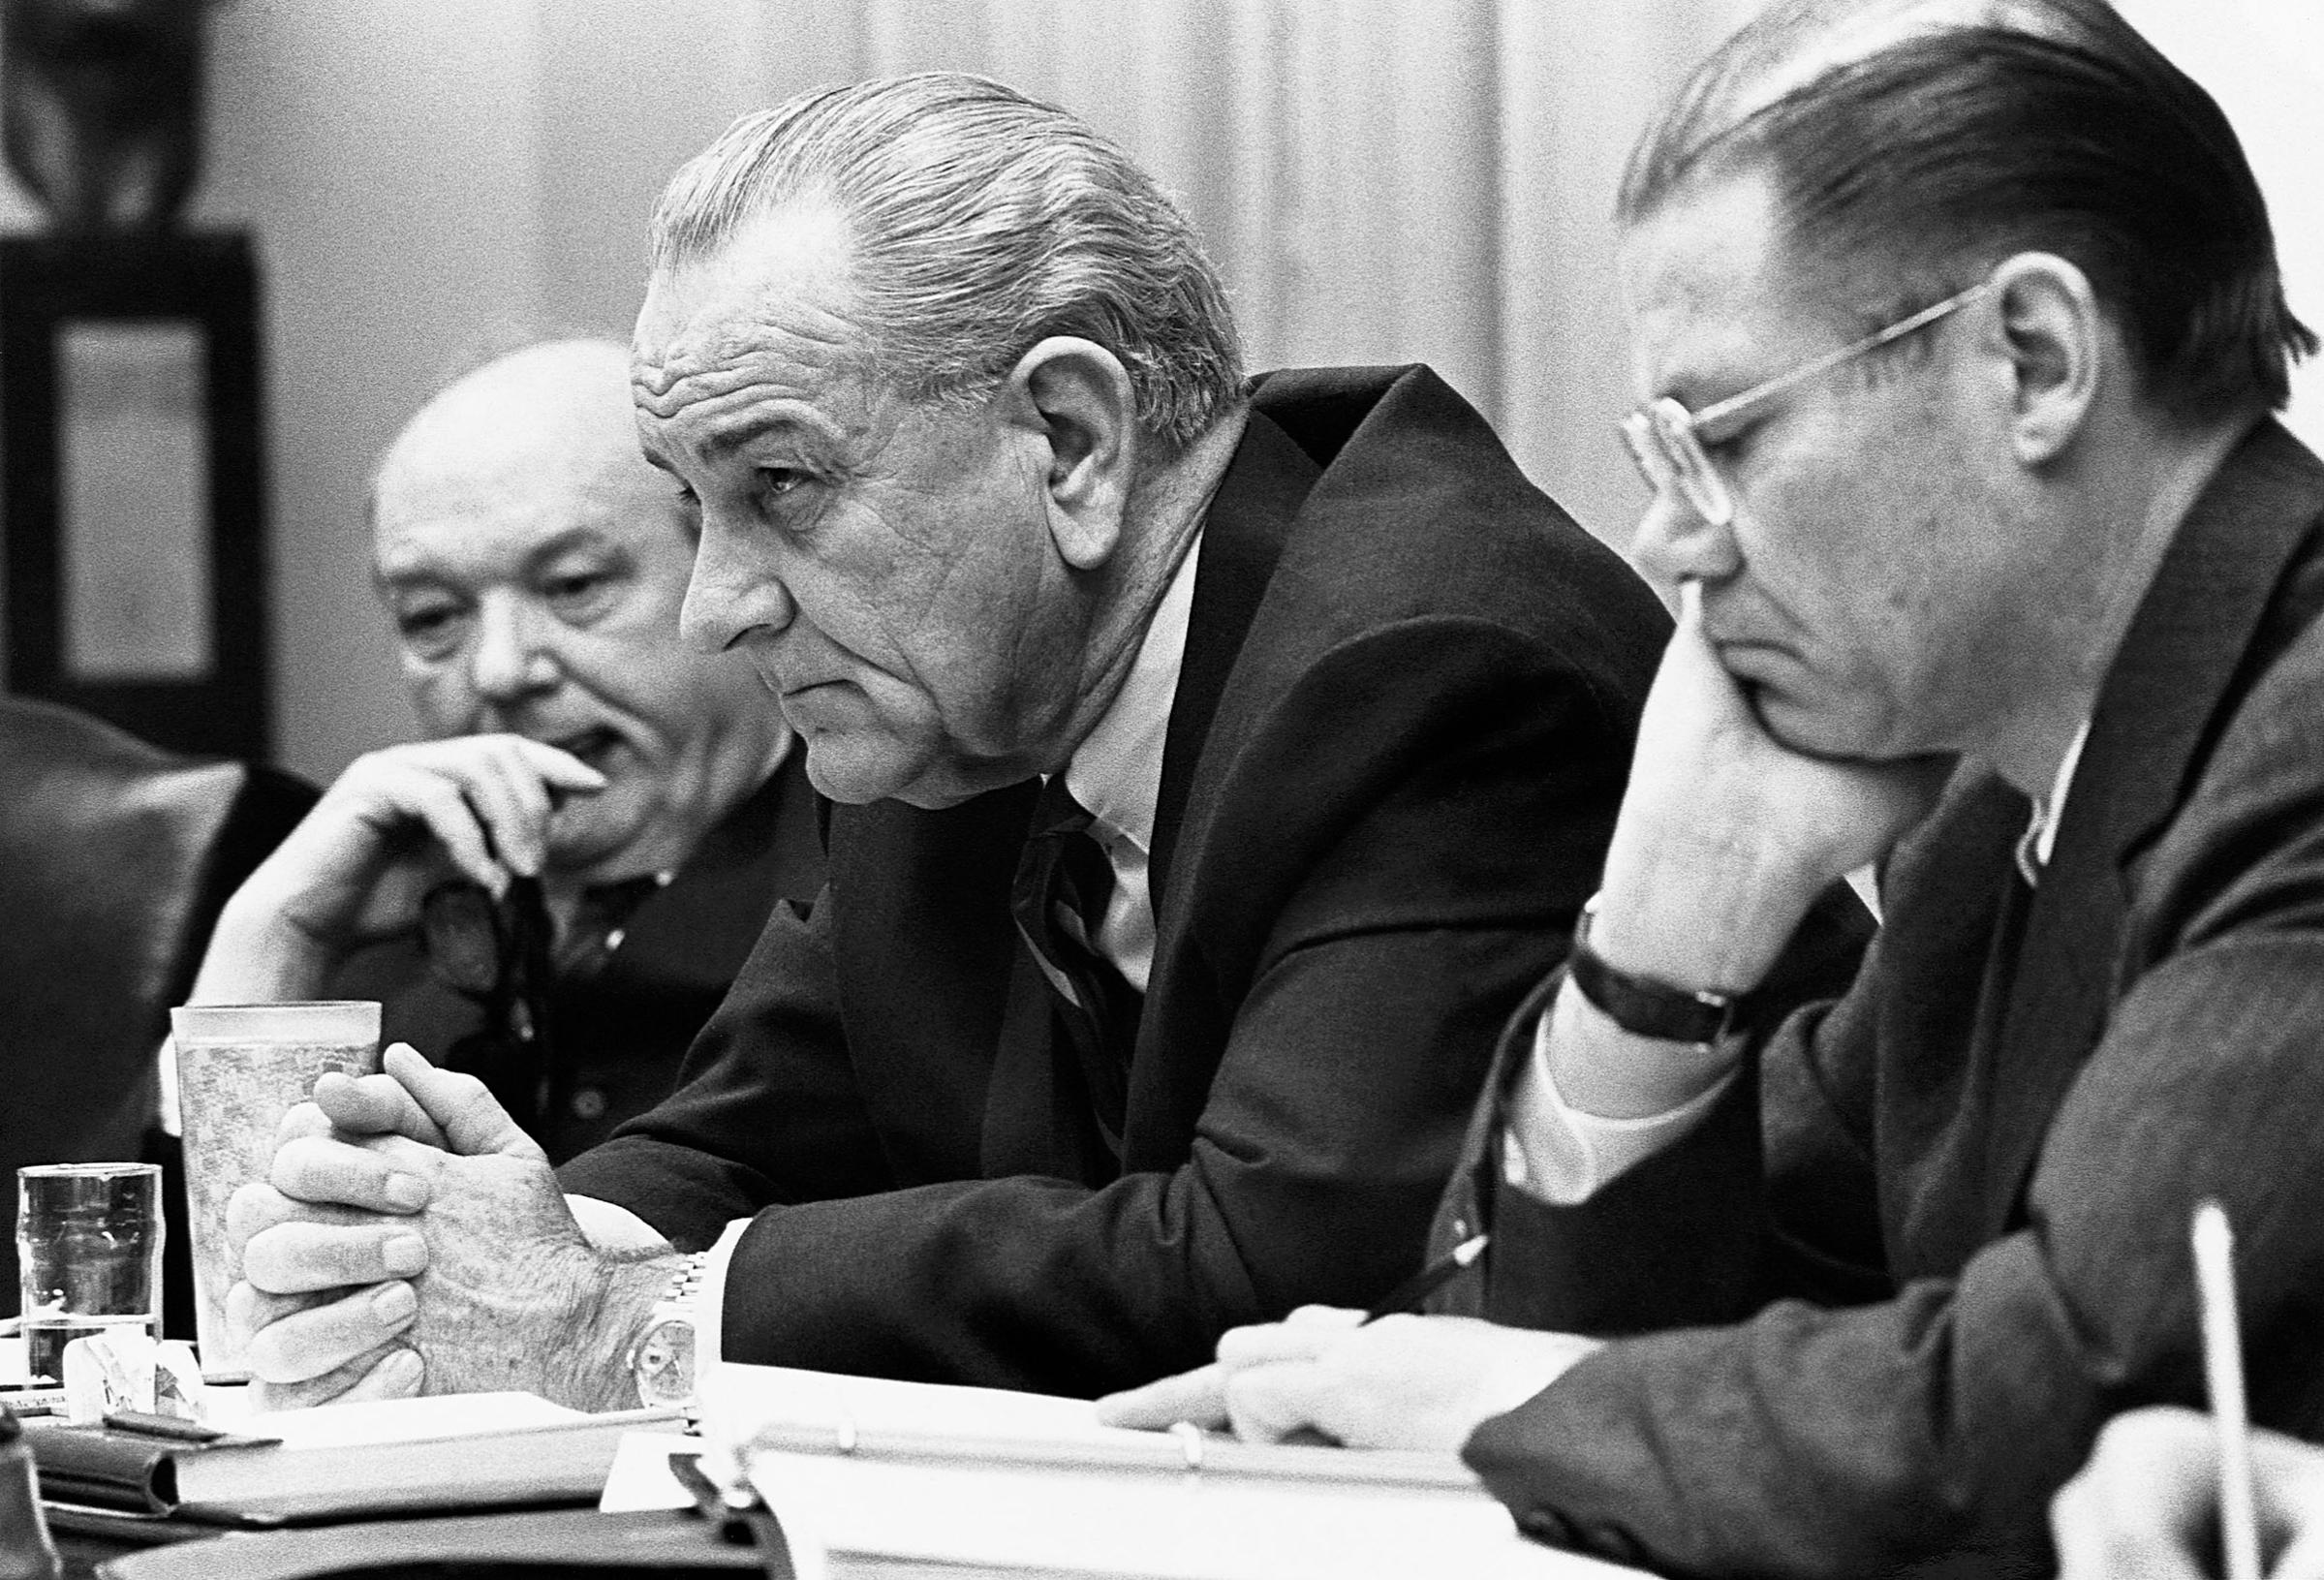 President Johnson With Advisers During Tet Offensive